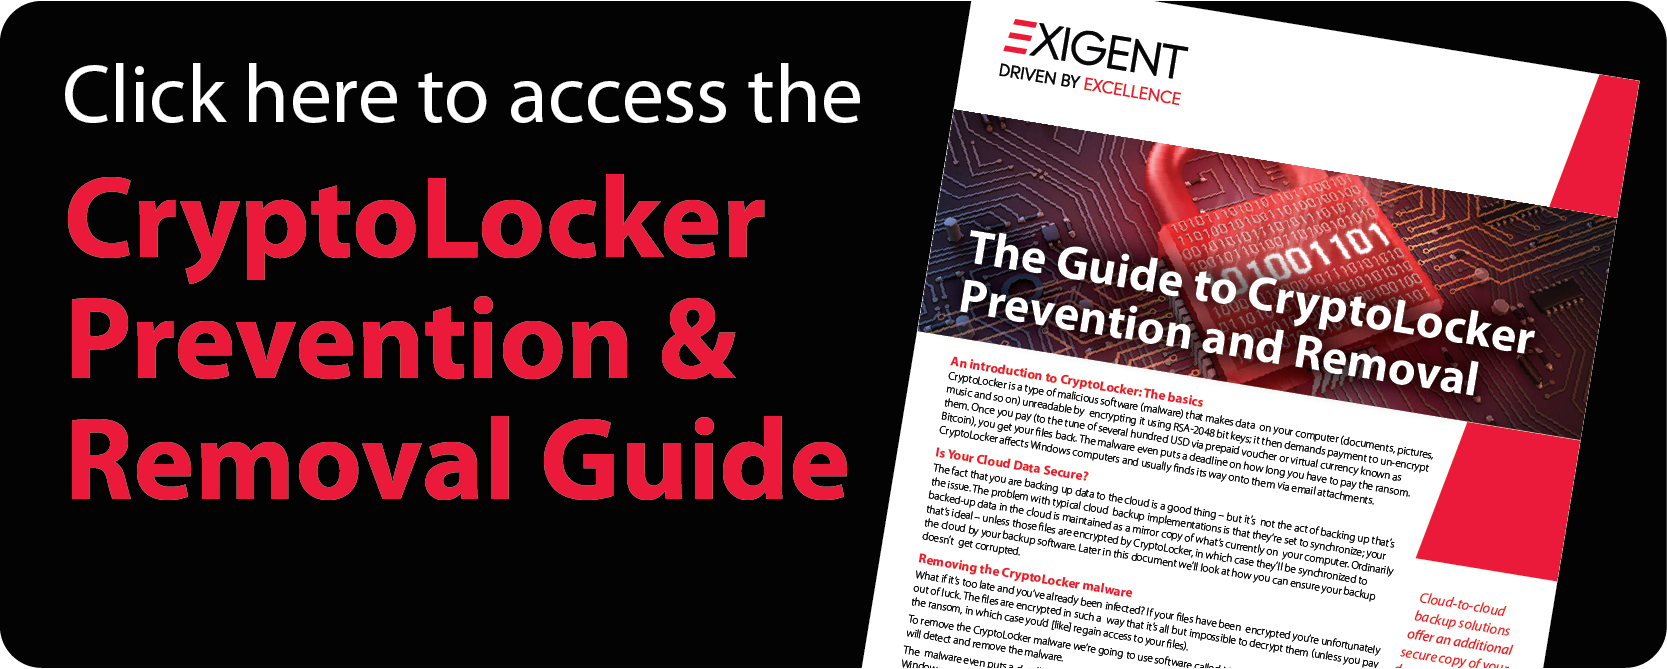 CryptoLocker Prevention Whitepaper, Download a Complimentary Whitepaper on CryptoLocker Prevention &#038; Removal